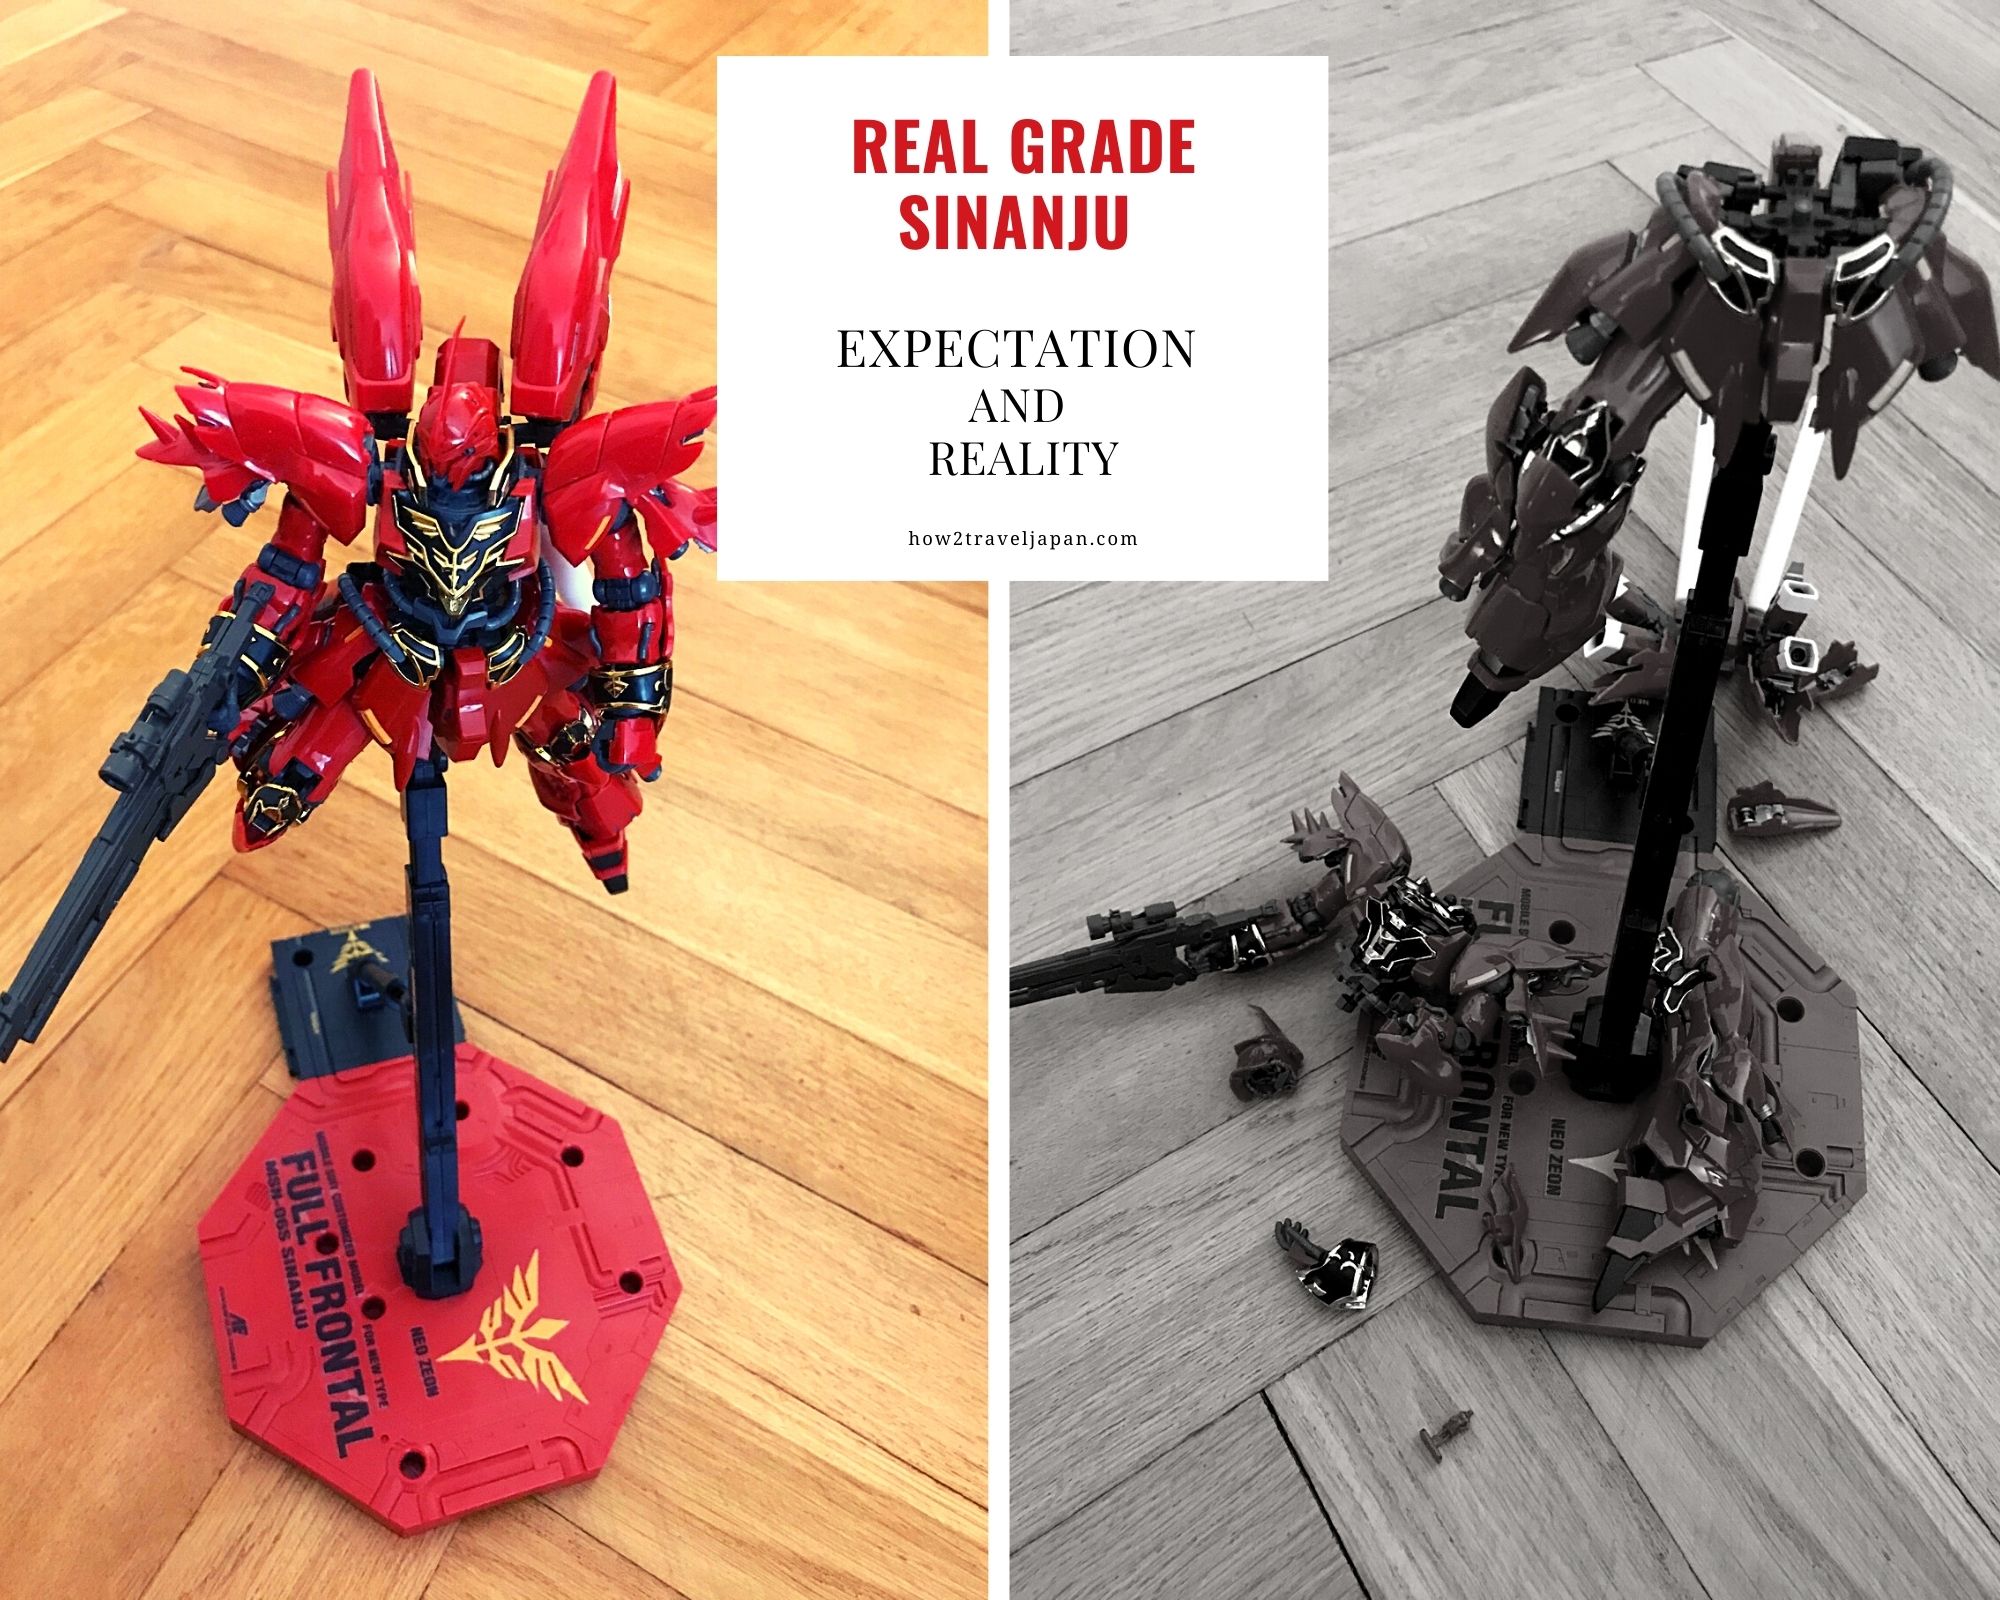 You are currently viewing REAL GRADE SINANJU: Not that great 【GUNPLA】